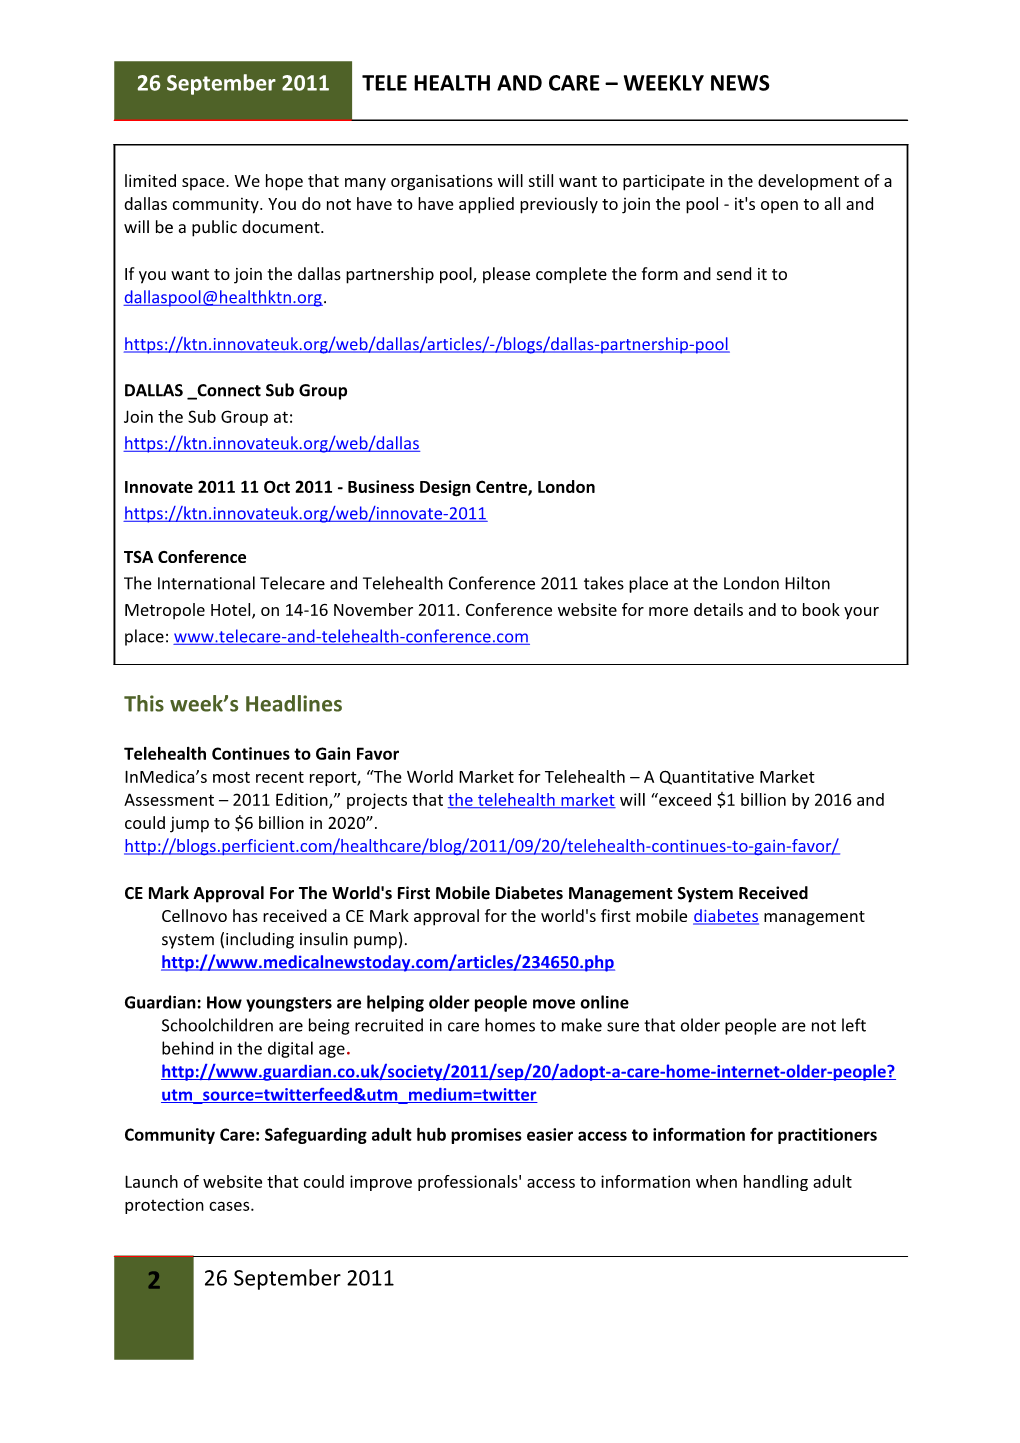 Updated List of News Links and Journal Articles 19September 2011 To26september 2011